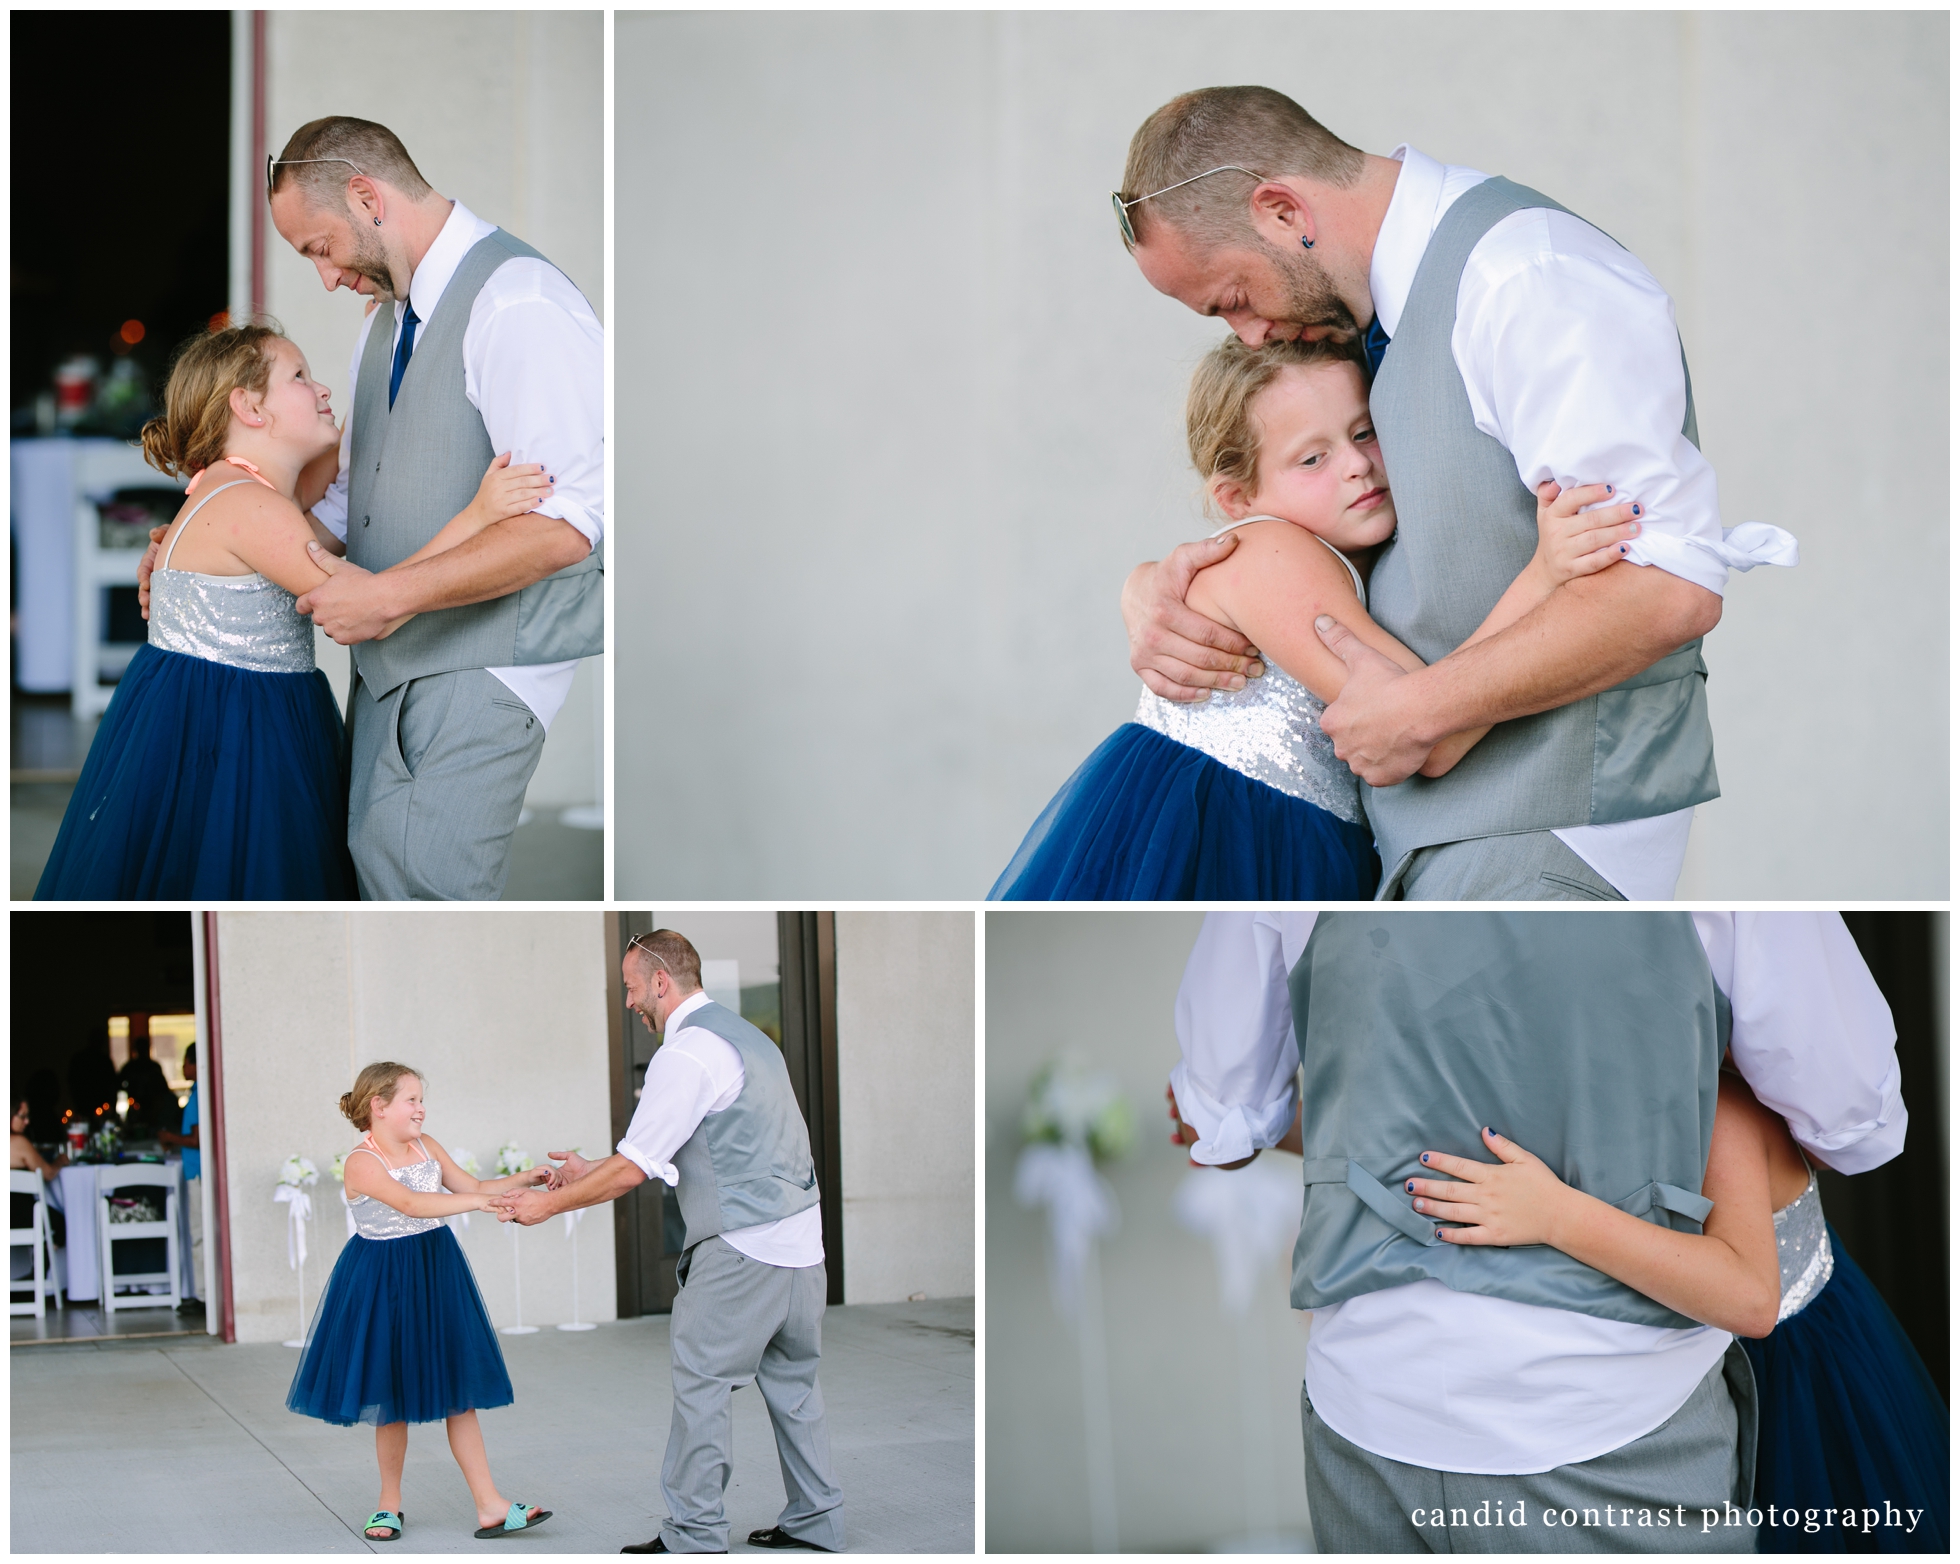 father daughter dance with a young daughter at a bellevue iowa outdoor wedding at the shore event center, iowa wedding photographer candid contrast photography